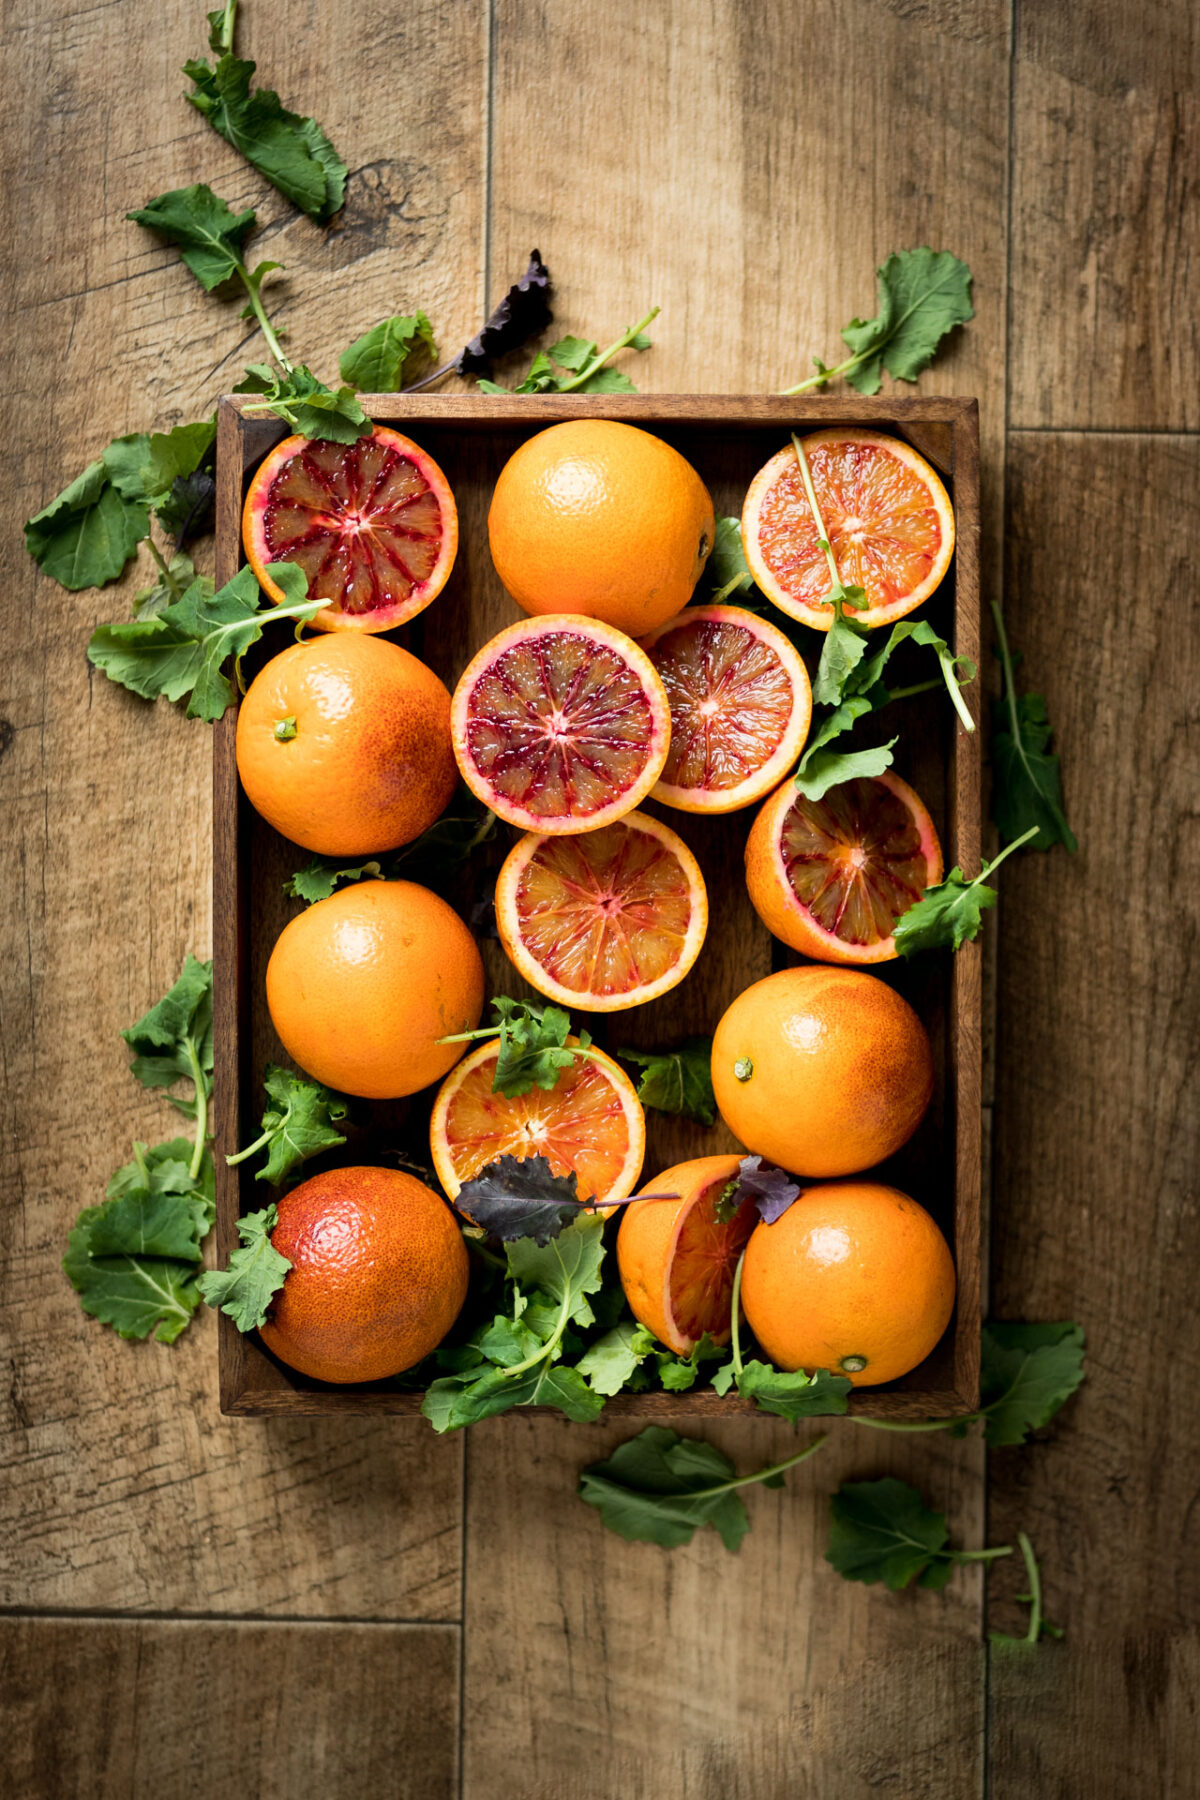 A bunch of blood orange, some whole and some sliced in half, laying in a wooden both on top of a wooden table and garnished with fresh salad greens.